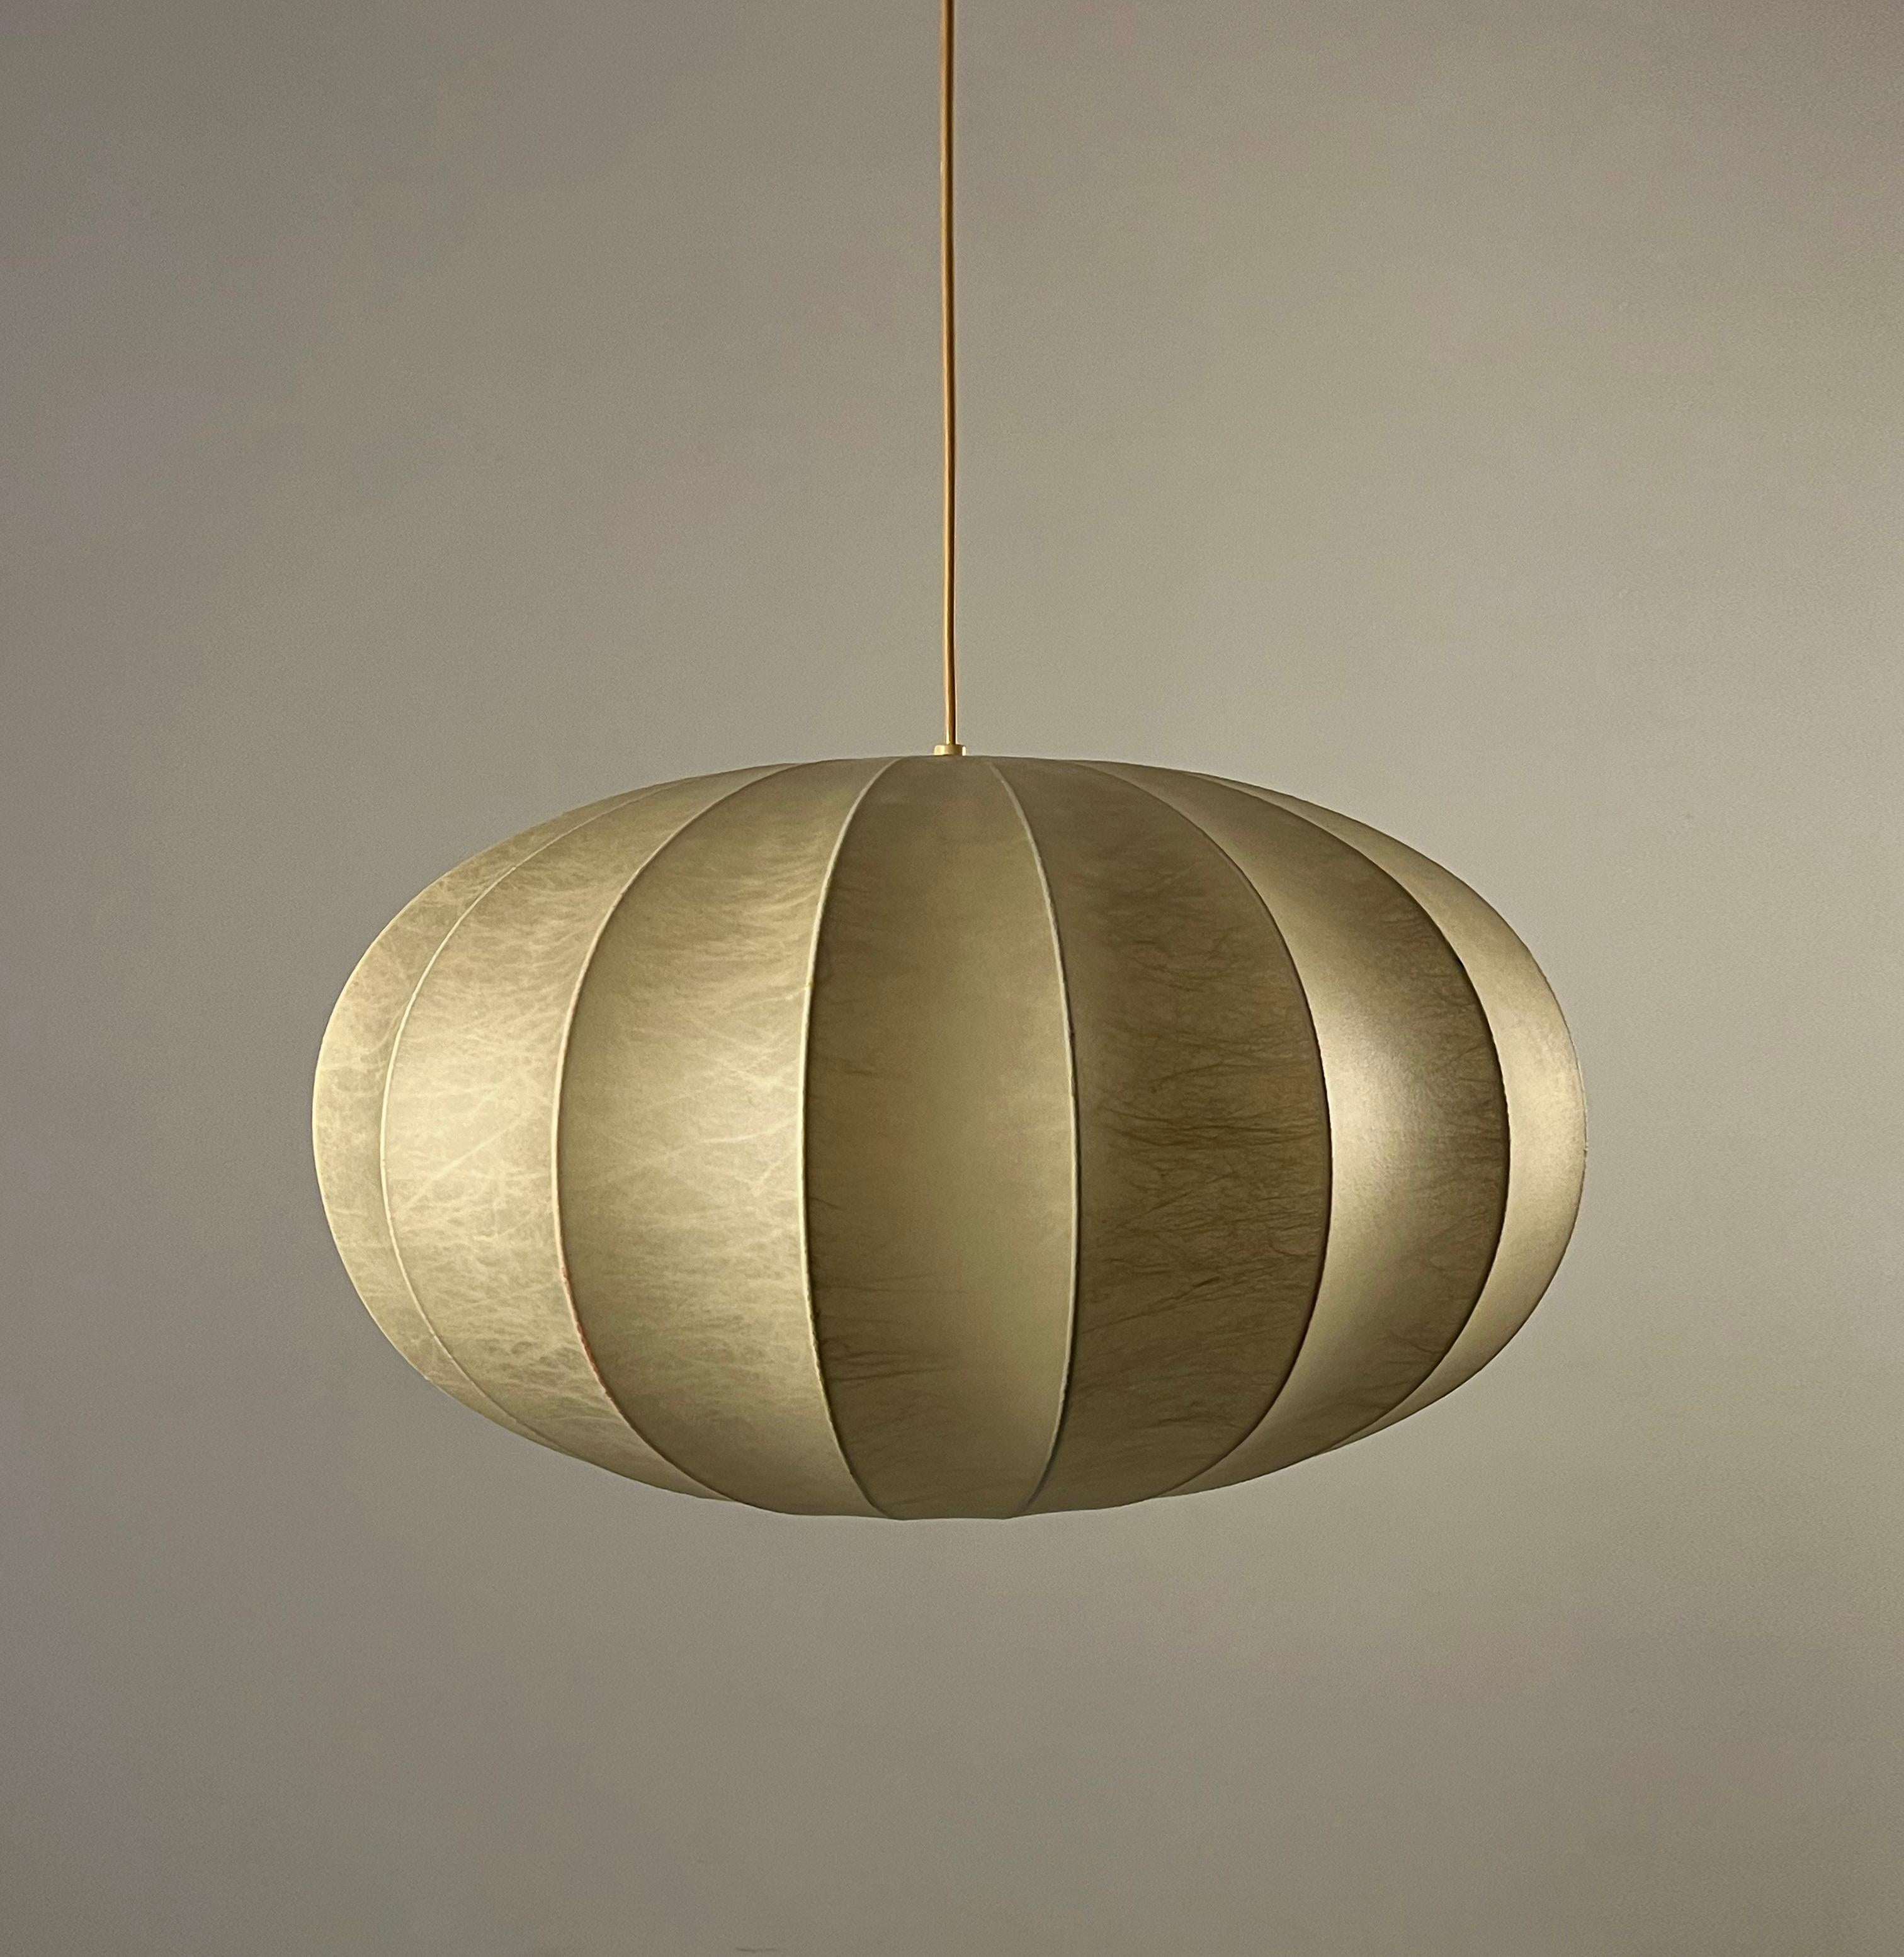 1960s Space Age Cocoon Pendant Lamp by Friedel Wauer for Goldkant Leuchten.

Immerse yourself in the enchanting space age with this spherical chandelier, a radiant masterpiece by Friedel Wauer for Goldkant Leuchten in 1960s Germany. Its enveloping